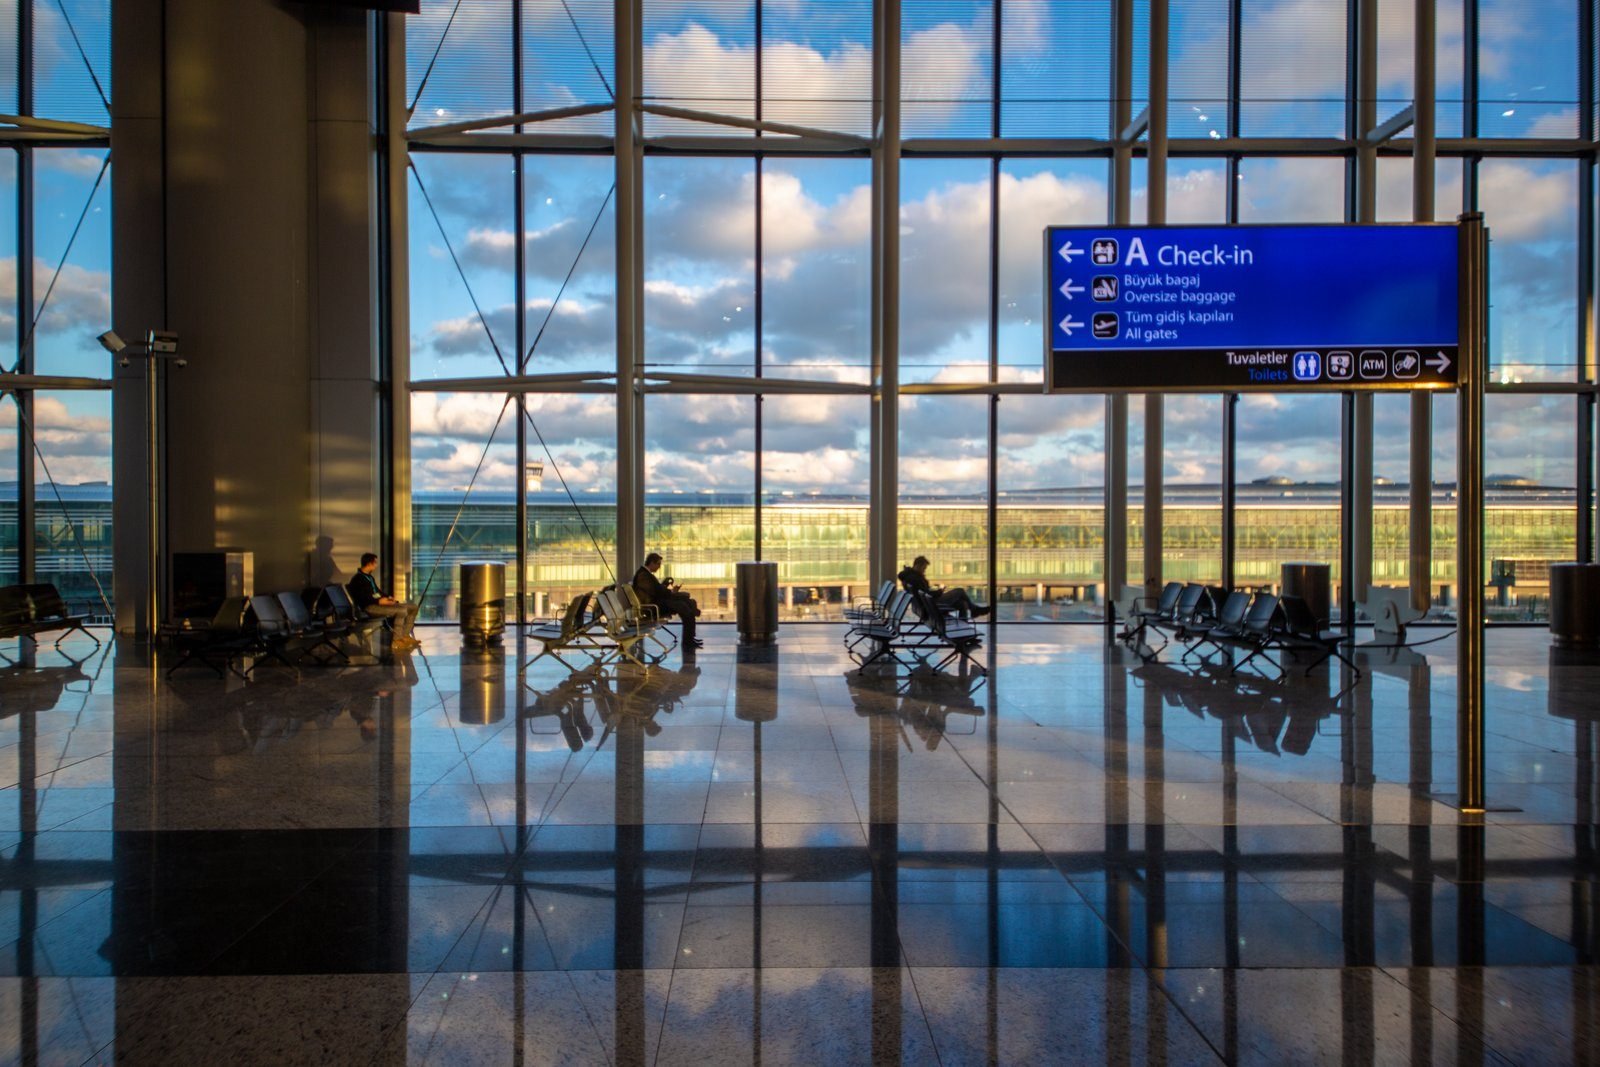 Take a Peek Inside the Biggest Airport in the World | Reader's Digest